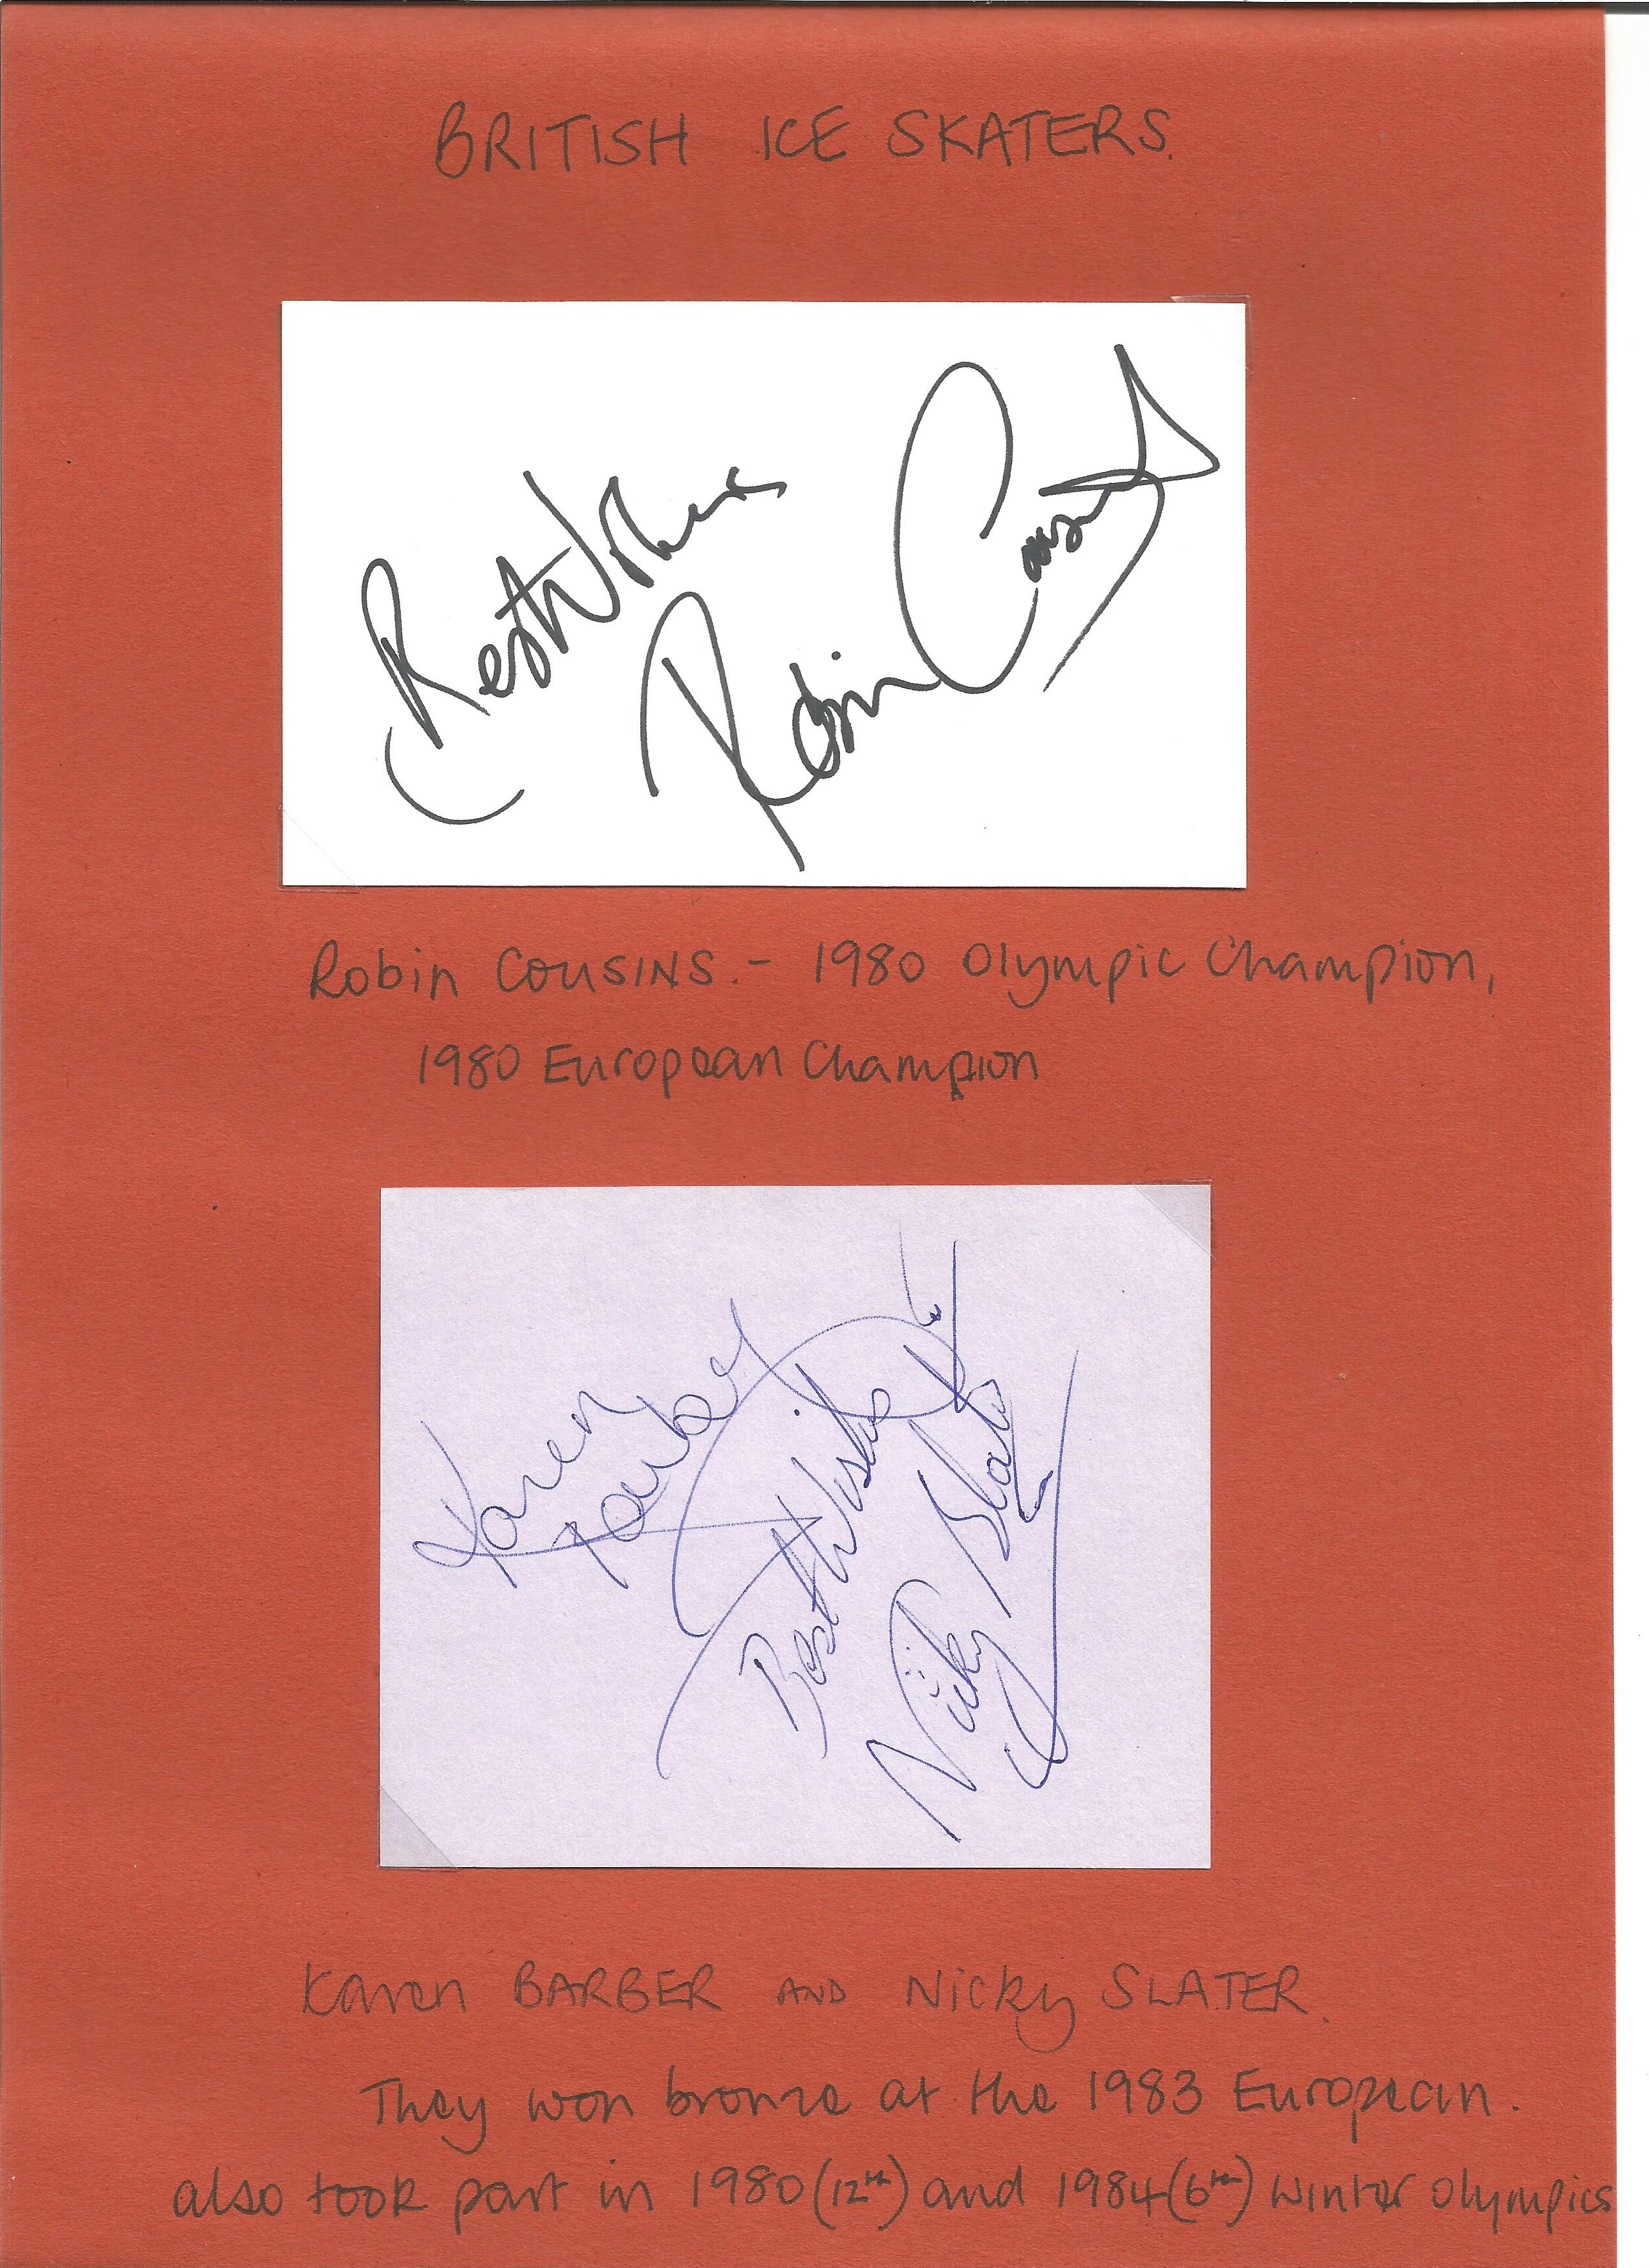 Ice Skating Robin Cousins signed card, Karen Barber and Nicky Slater album page fixed by corner tabs